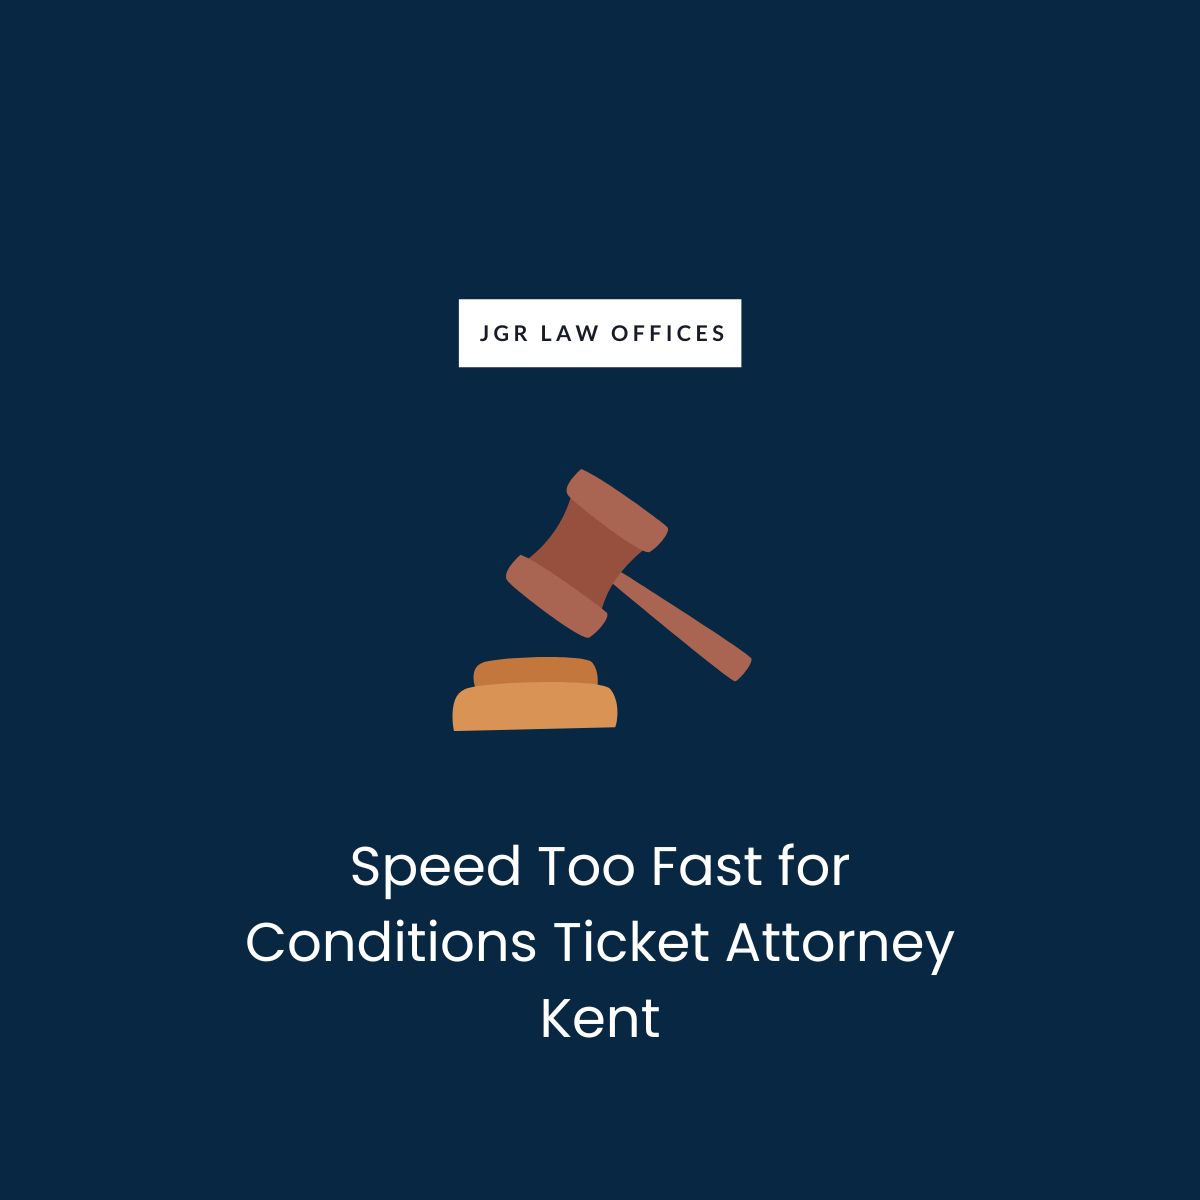 Speed Too Fast for Conditions Ticket Attorney Kent